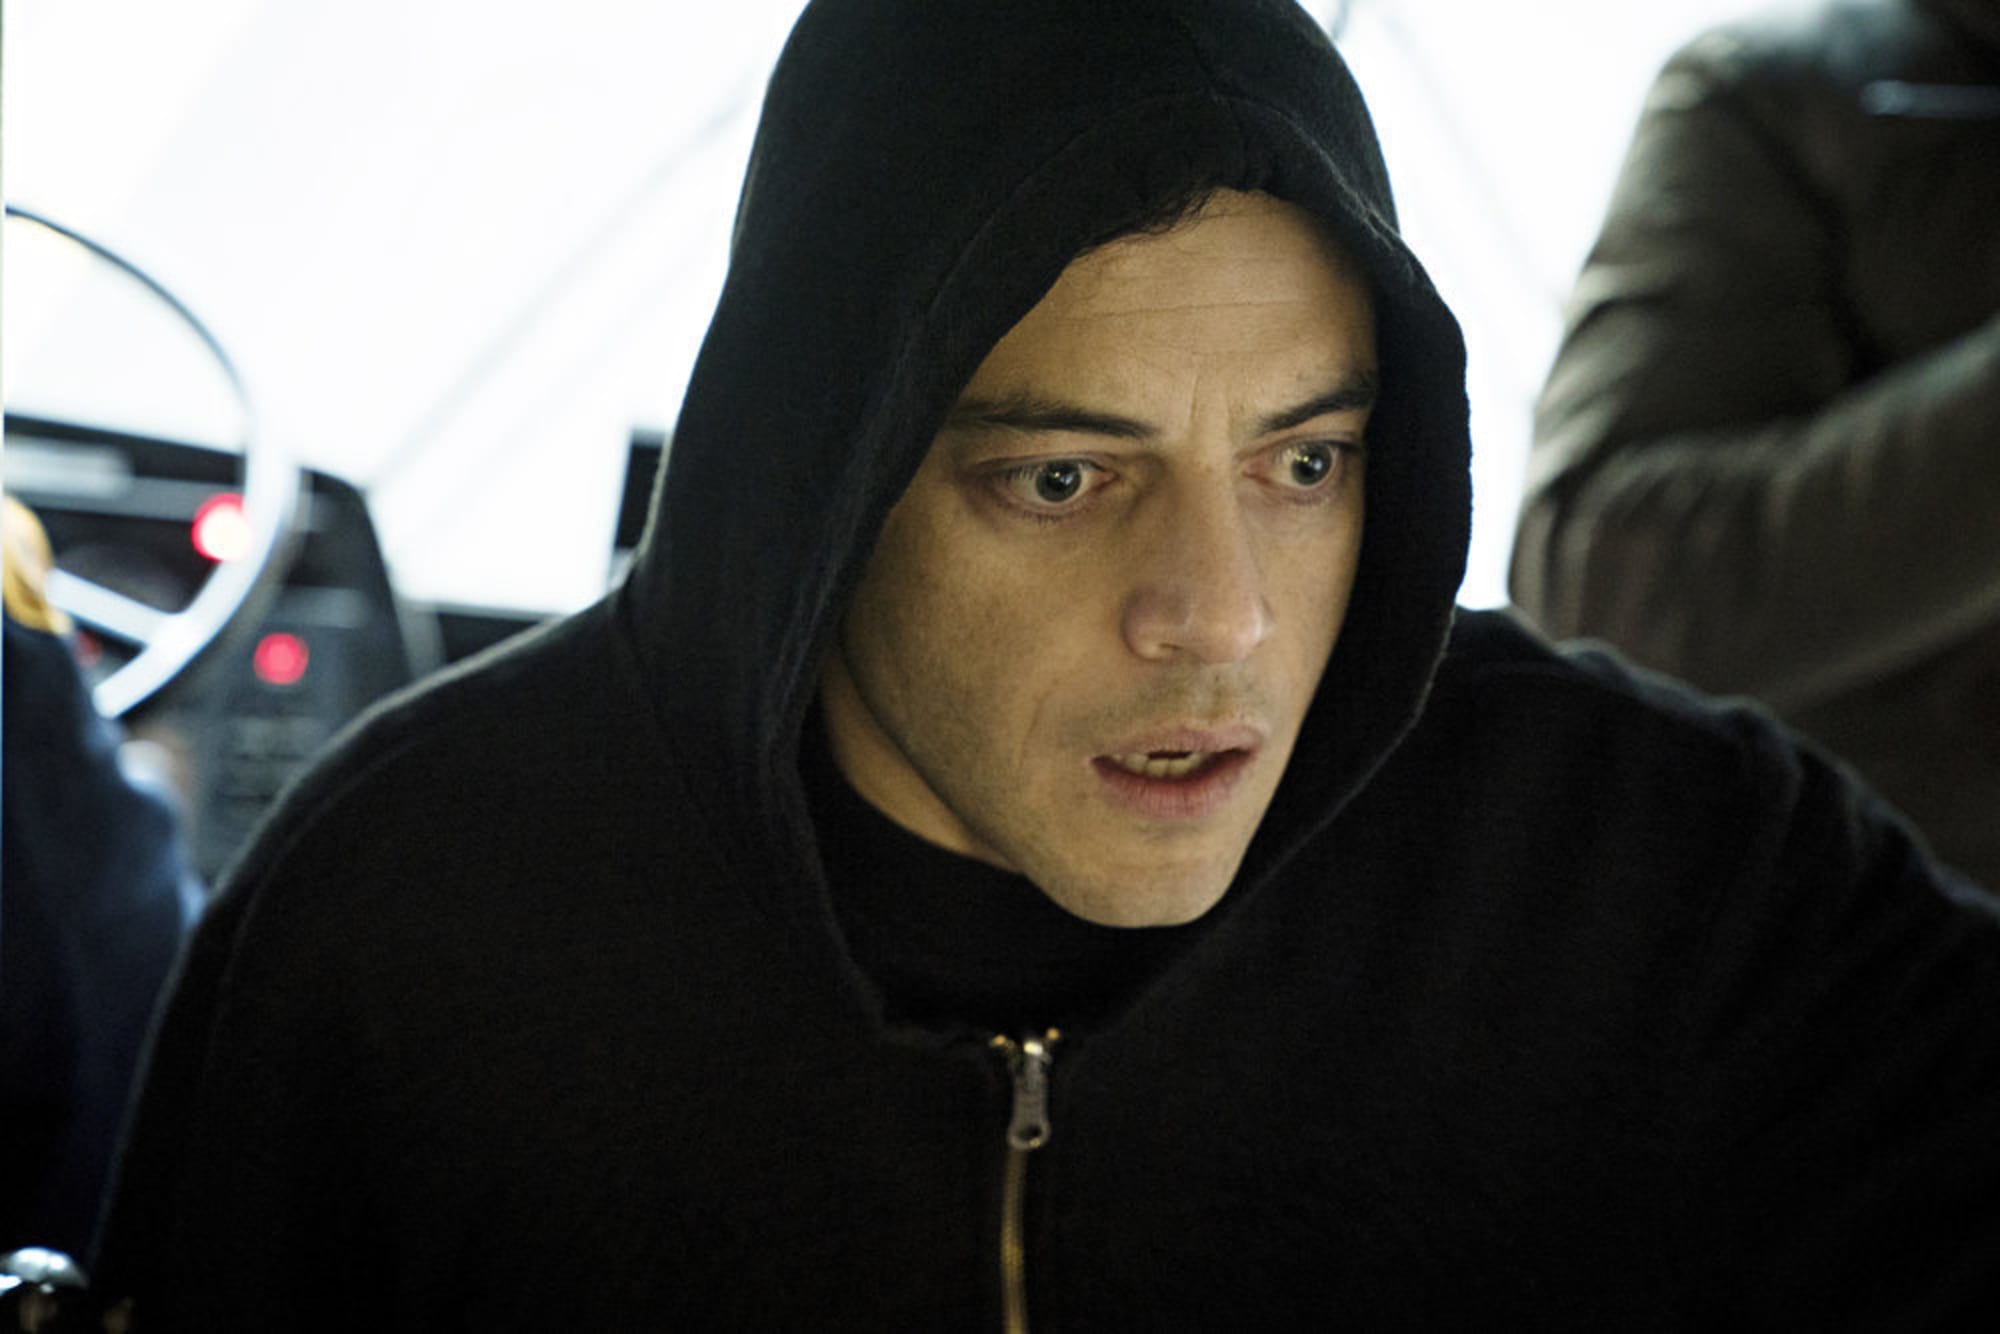 Mr Robot Season 4 Episode 6: A Timely Lesson In Password Security